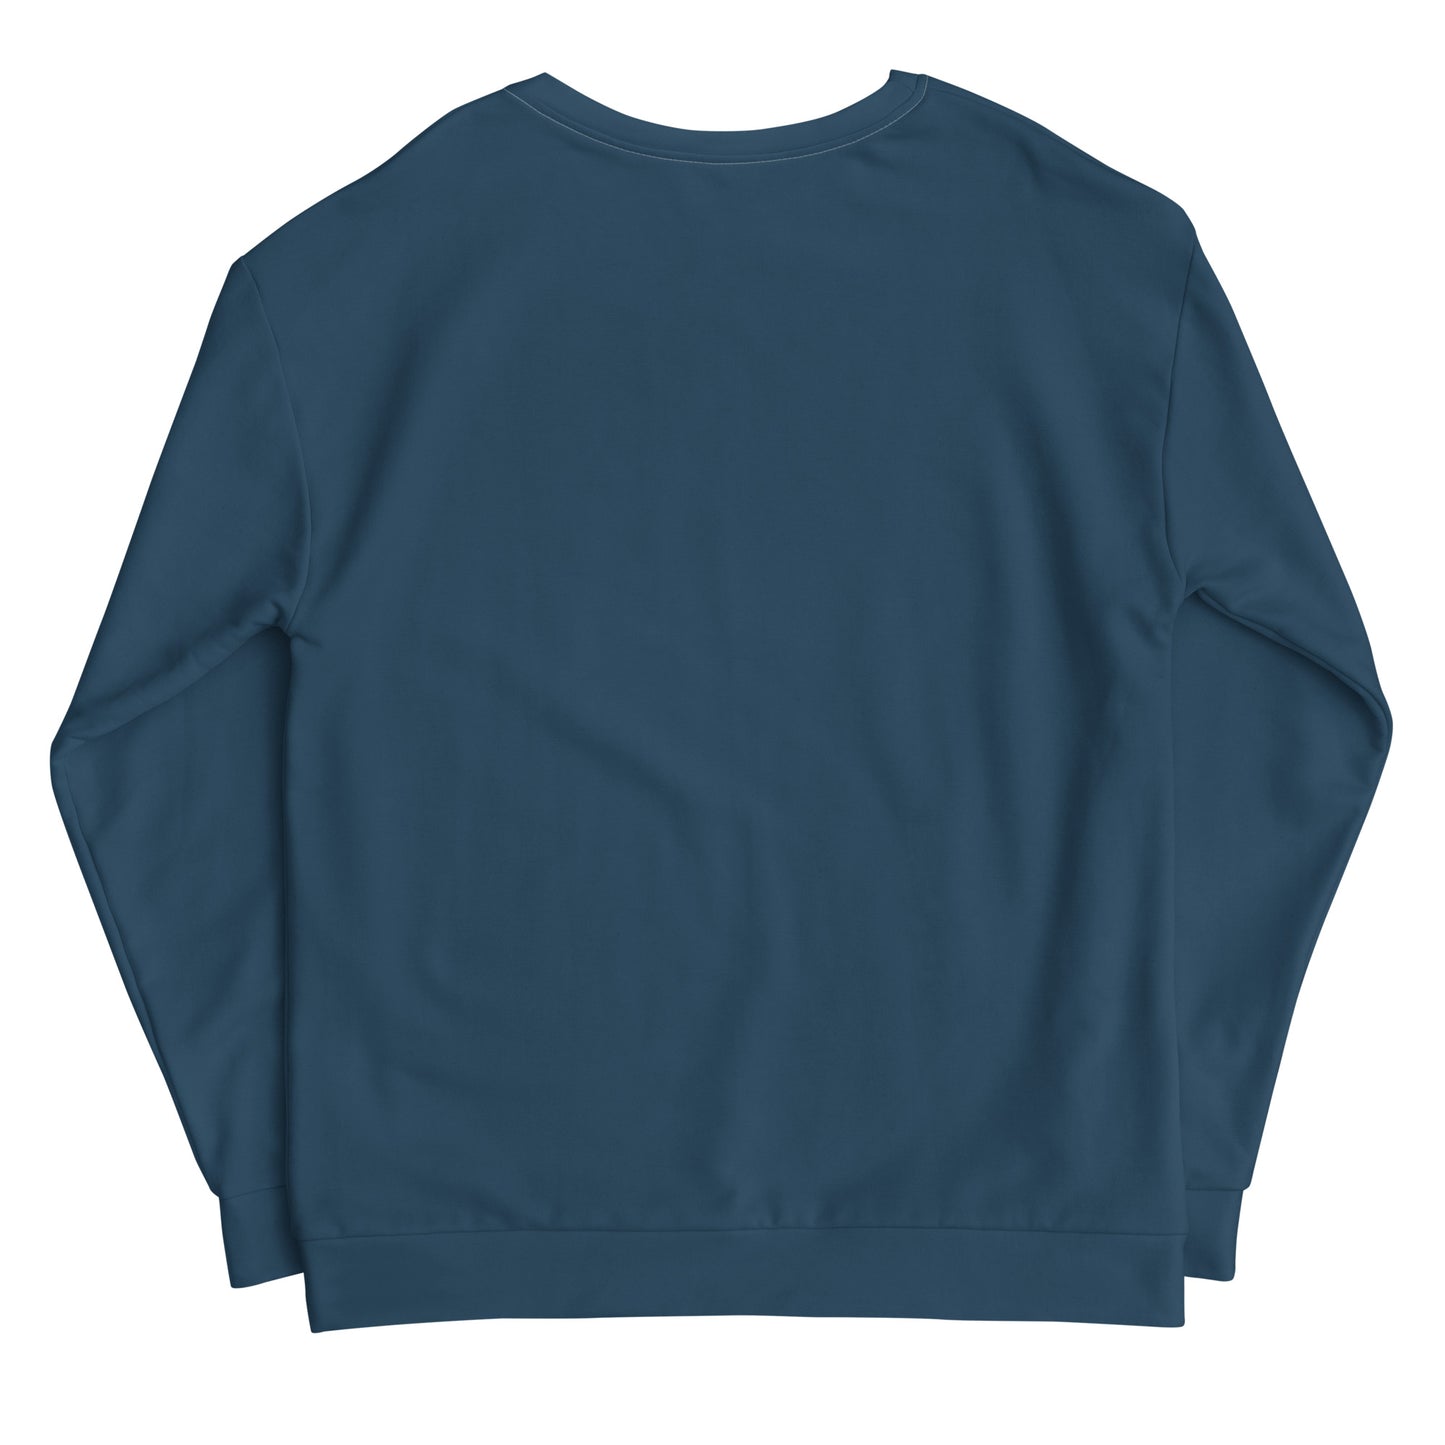 Ocean Blue Climate Change Global Warming Statement - Sustainably Made Sweatshirt